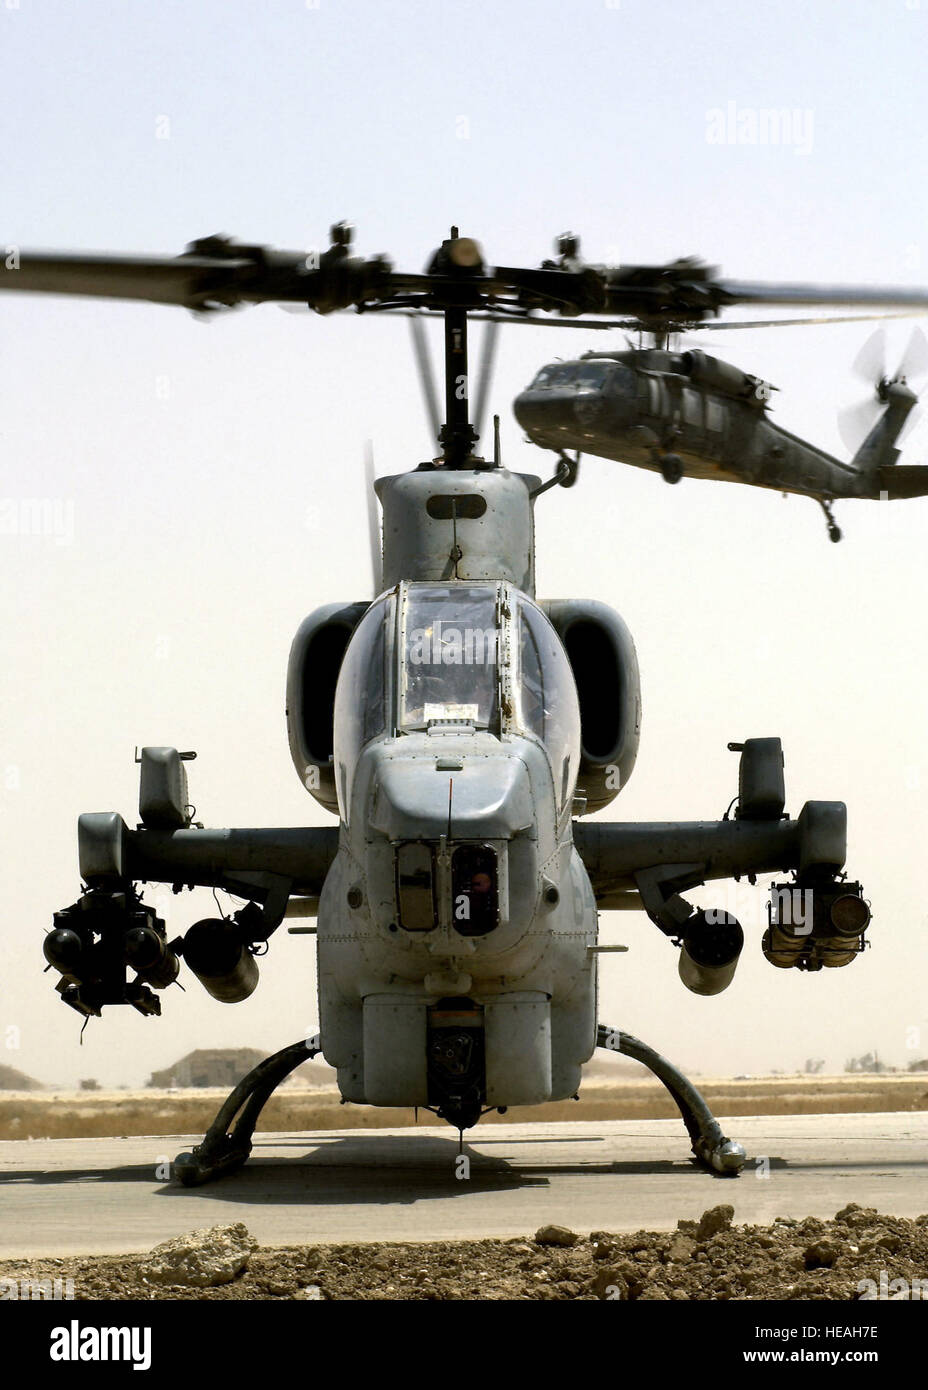 A US Marine Corps (USMC) AH-1W Super Cobra helicopter armed with AGM-114 Hellfire missiles and 2.75-inch Folding Fin Aerial Rockets (FFAR) awaits refueling at a Forward Area Refueling Point (FARP), at Tallil Air Base, Iraq during Operation IRAQI FREEDOM. A US Army (USA) UH-60 Black Hawk helicopter is on approach in the background. Stock Photo